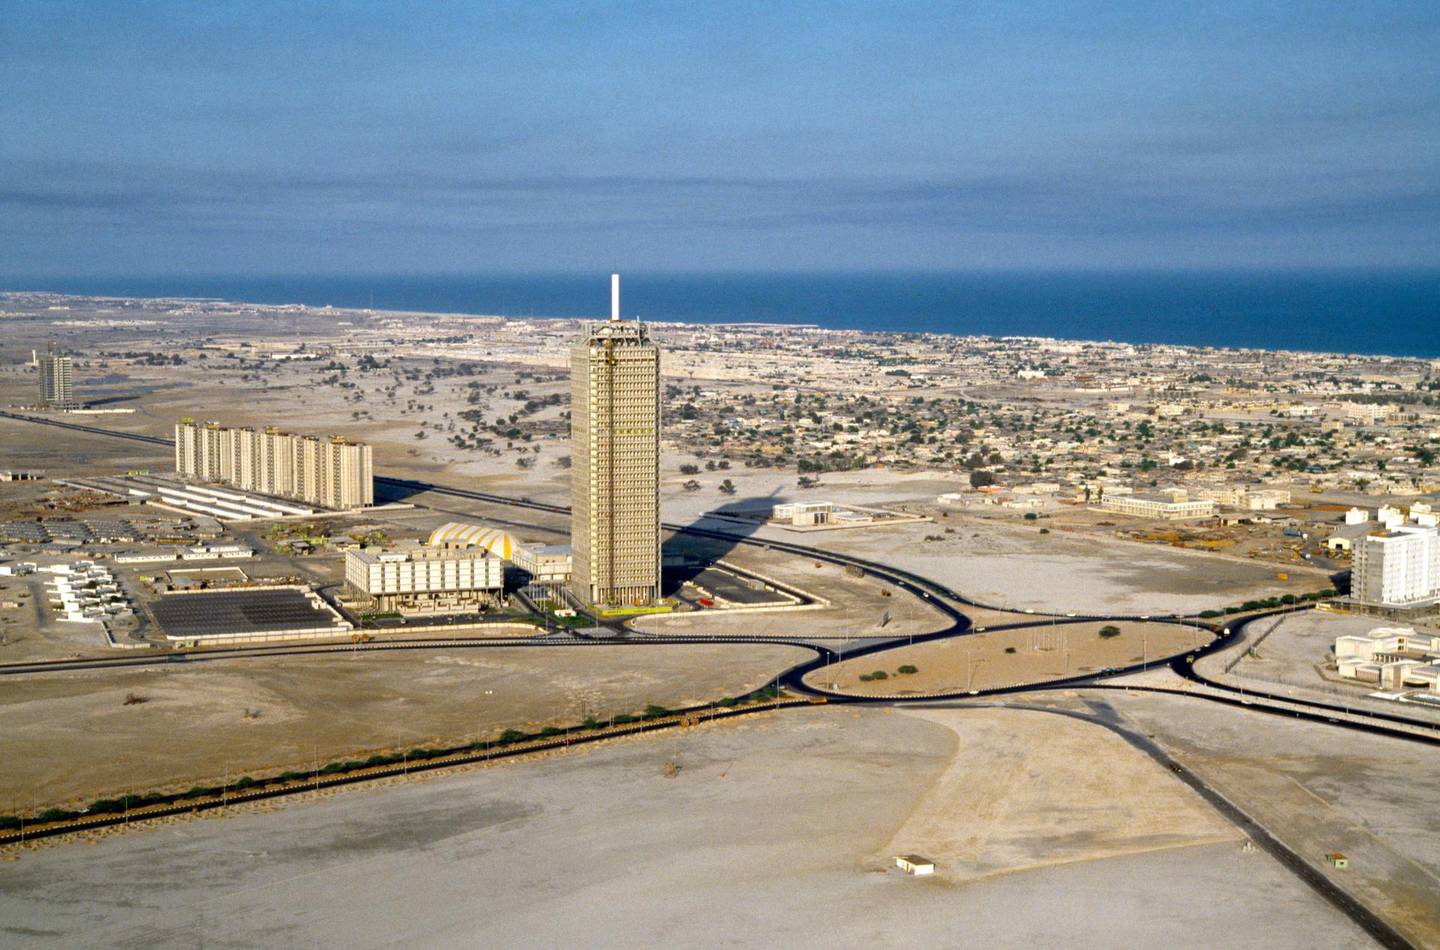 BDPBDC Dubai UAE Aerial Of The Trade Centre And Sheikh Zayed Road In 1978. Image shot 1978. Exact date unknown.